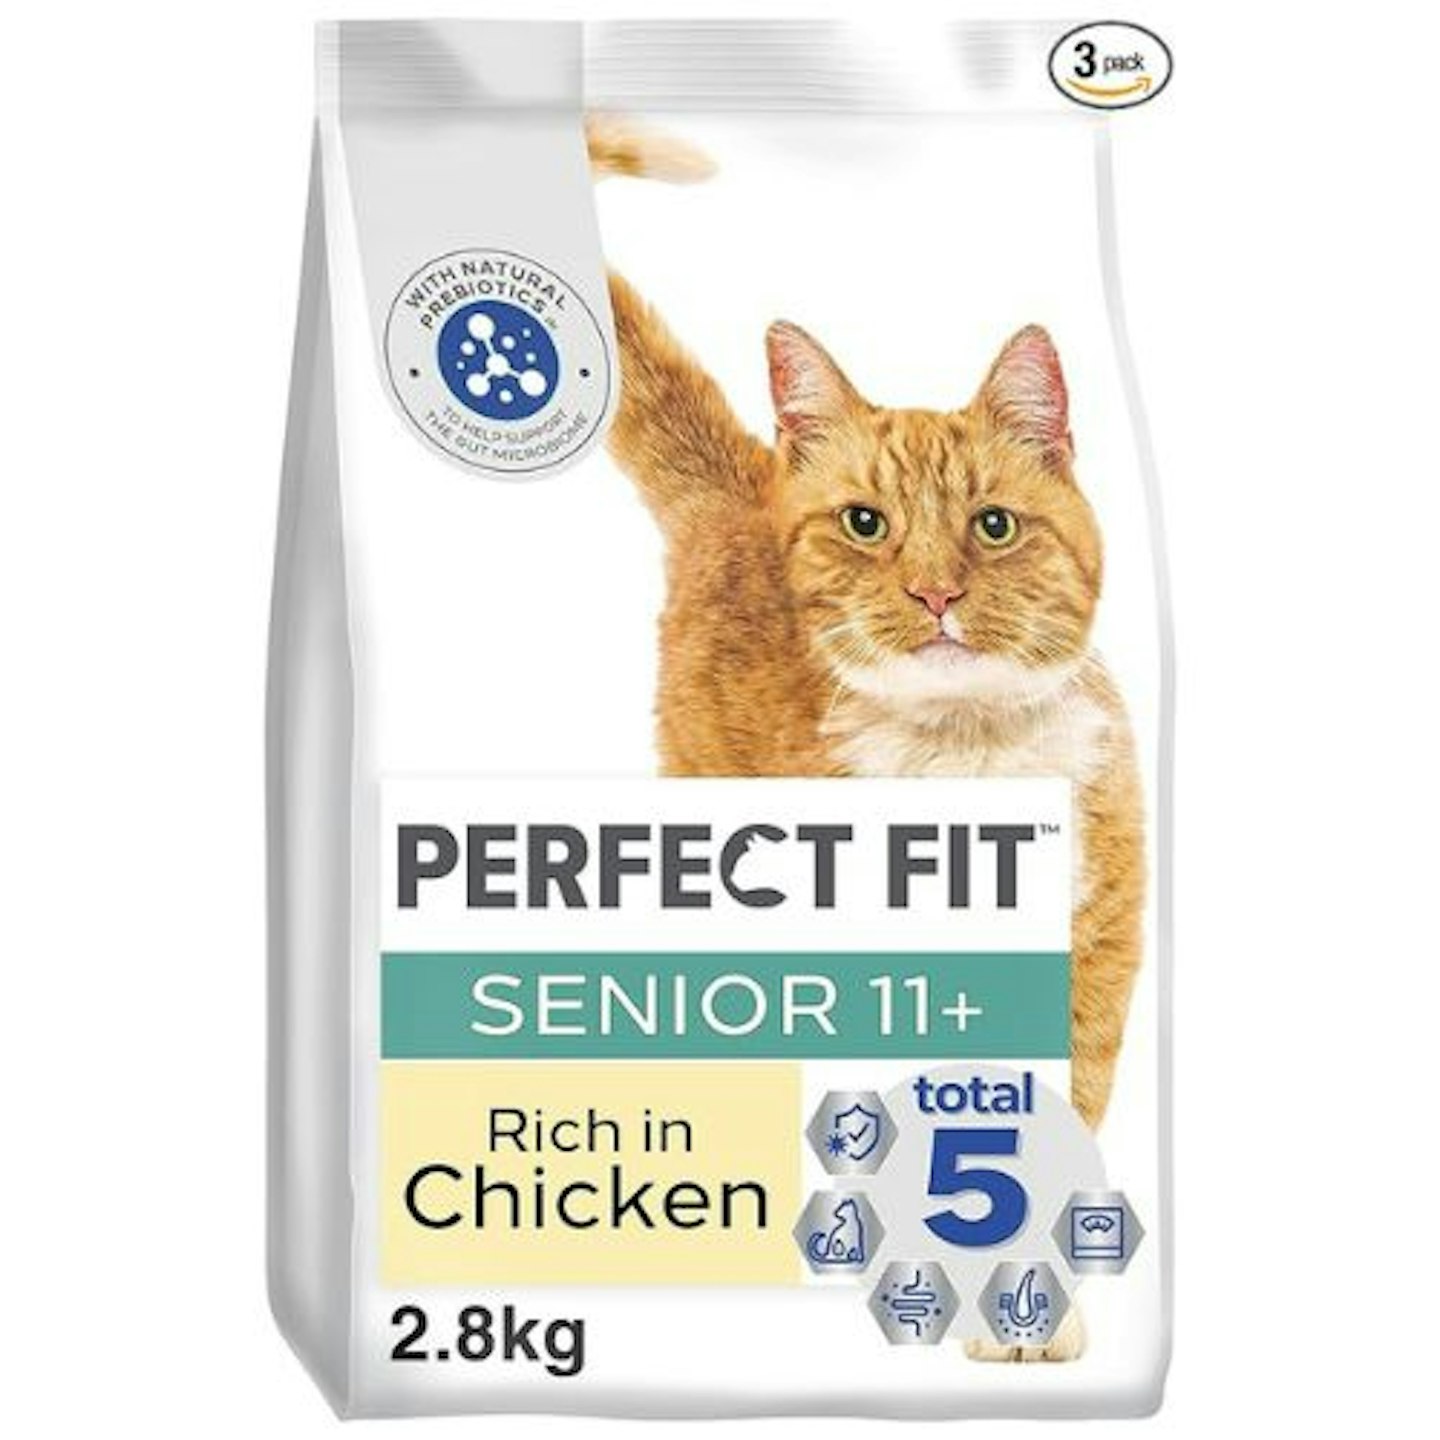 Perfect Fit Senior 11+ Complete Dry Cat Food for Senior Cats